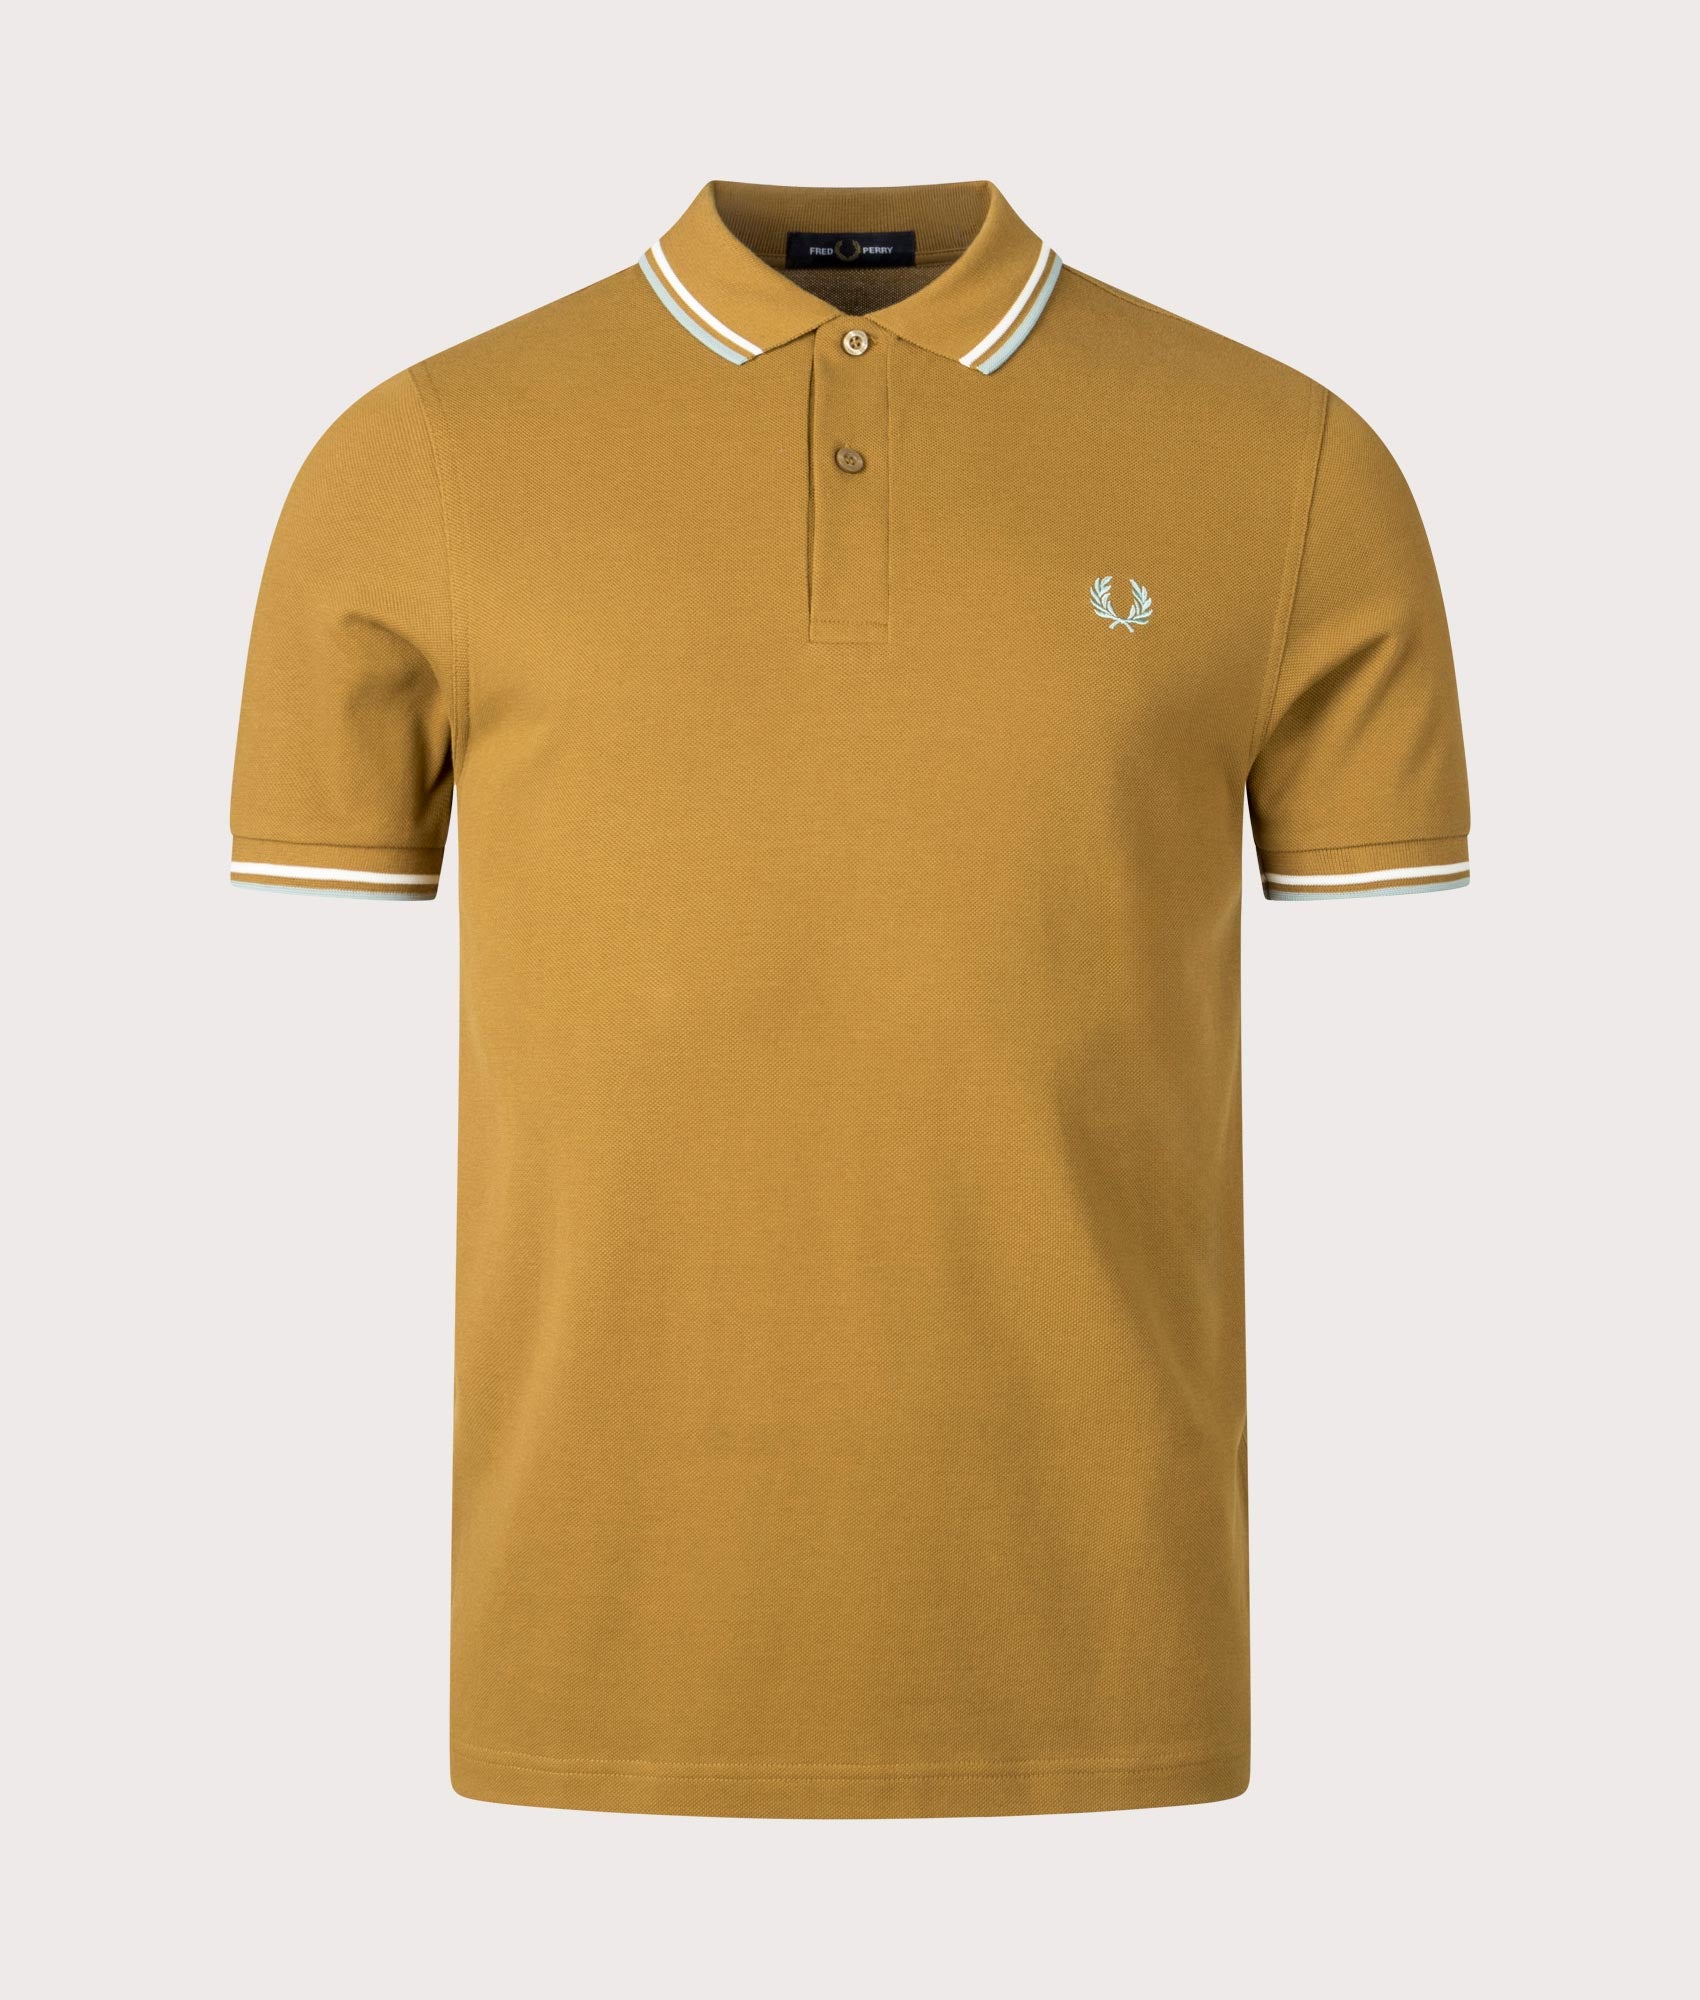 Fred Perry Mens Twin Tipped Fred Perry Shirt - Colour: V23 Dark Caramel/Snow White/Silver Blue - Siz